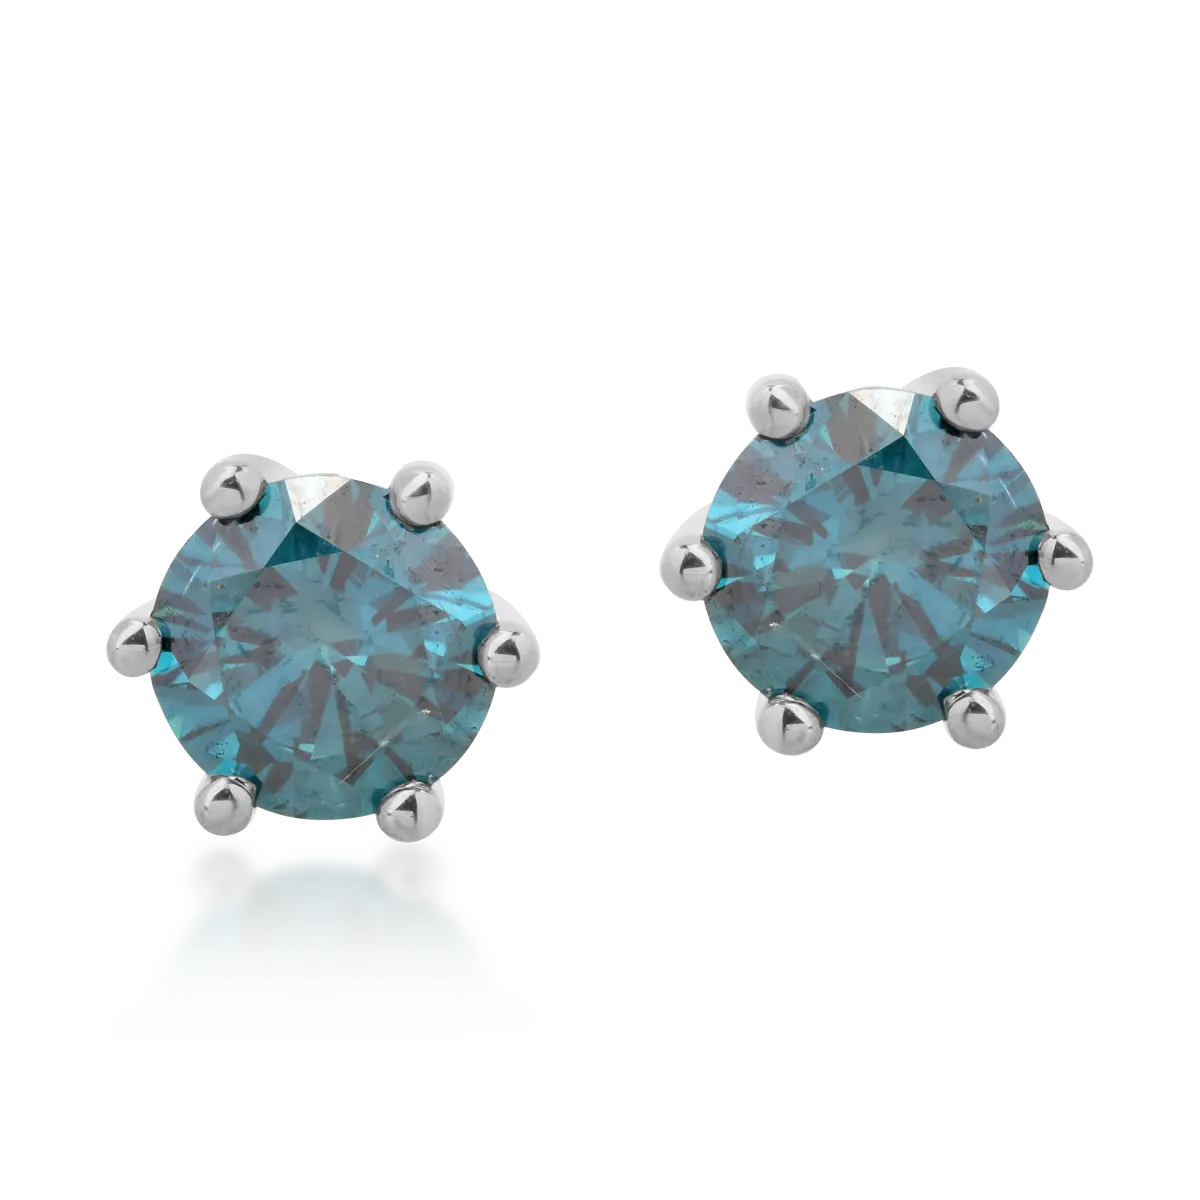 18K white gold earrings with 0.8ct blue diamonds